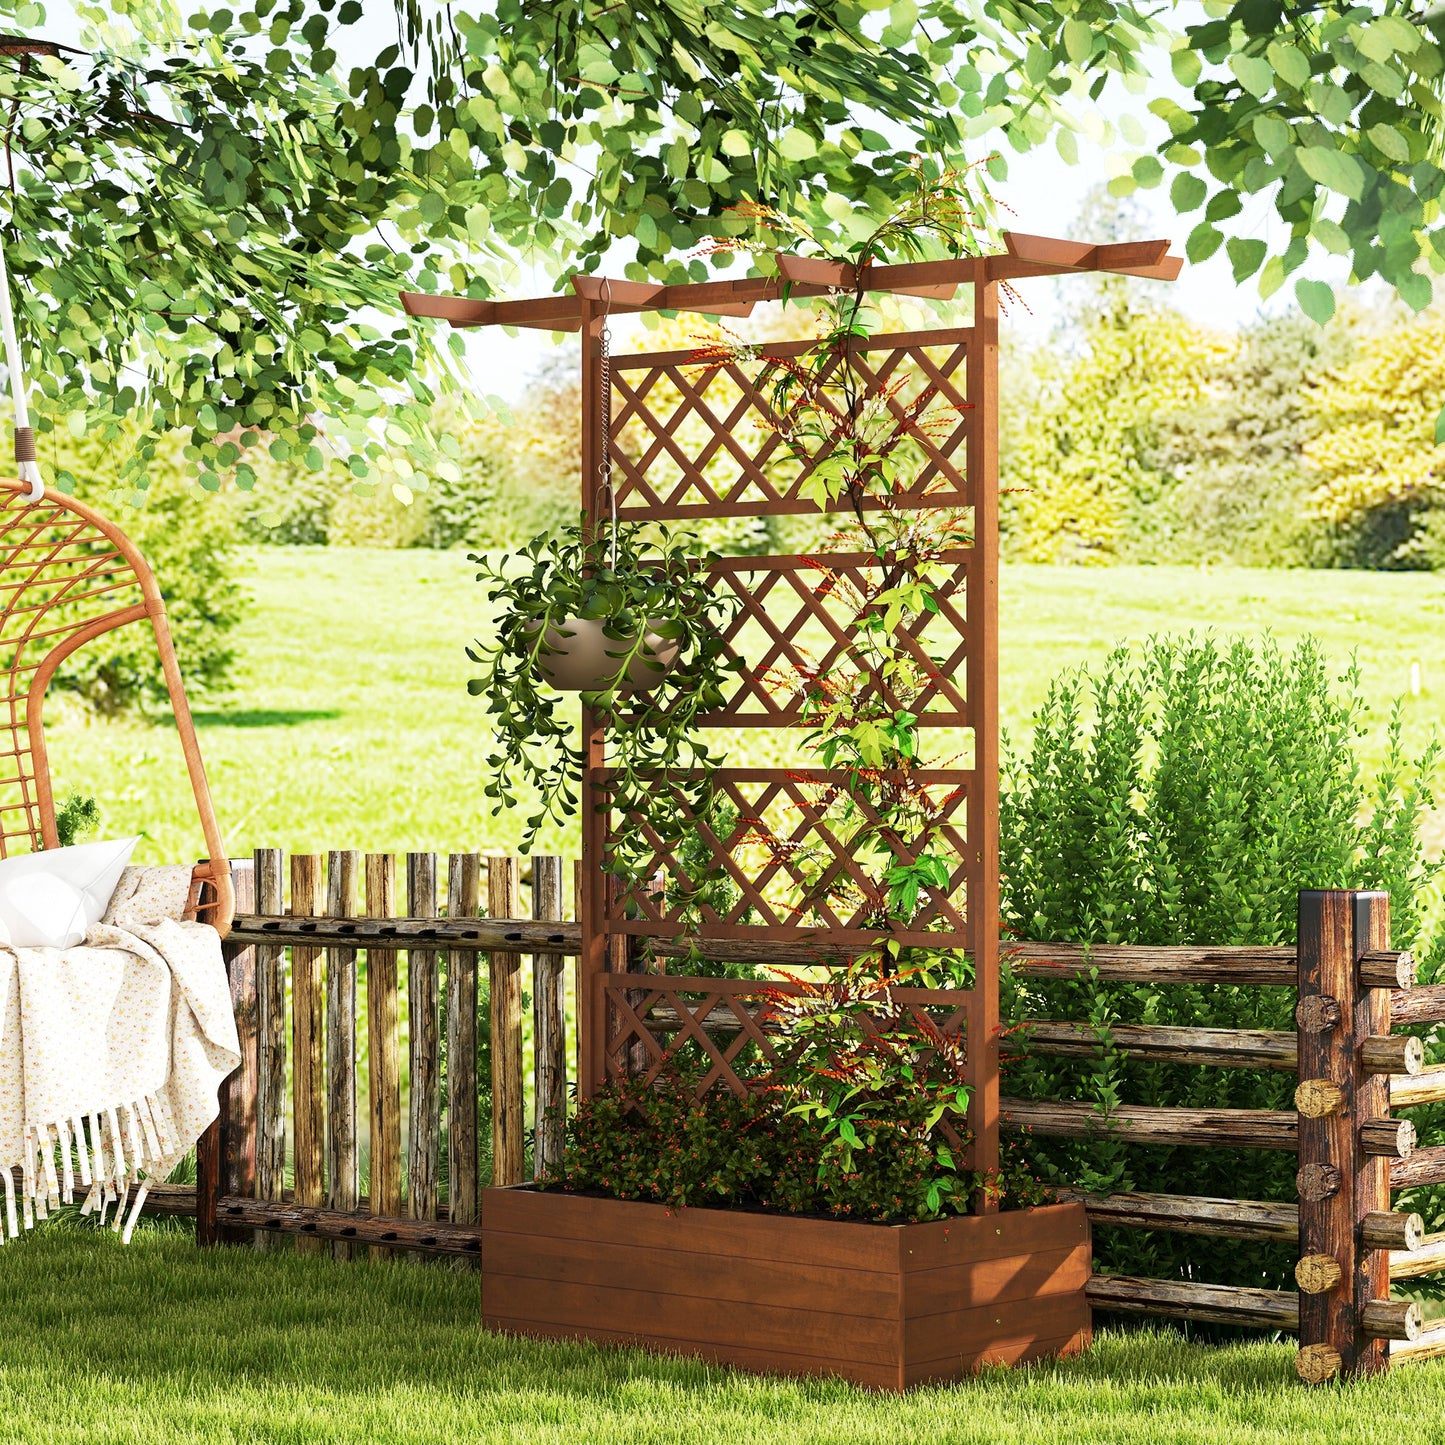 Outsunny Wooden Trellis Planter Box, Raised Garden Bed to Grow Vegetables, Herbs and Flowers, Orange